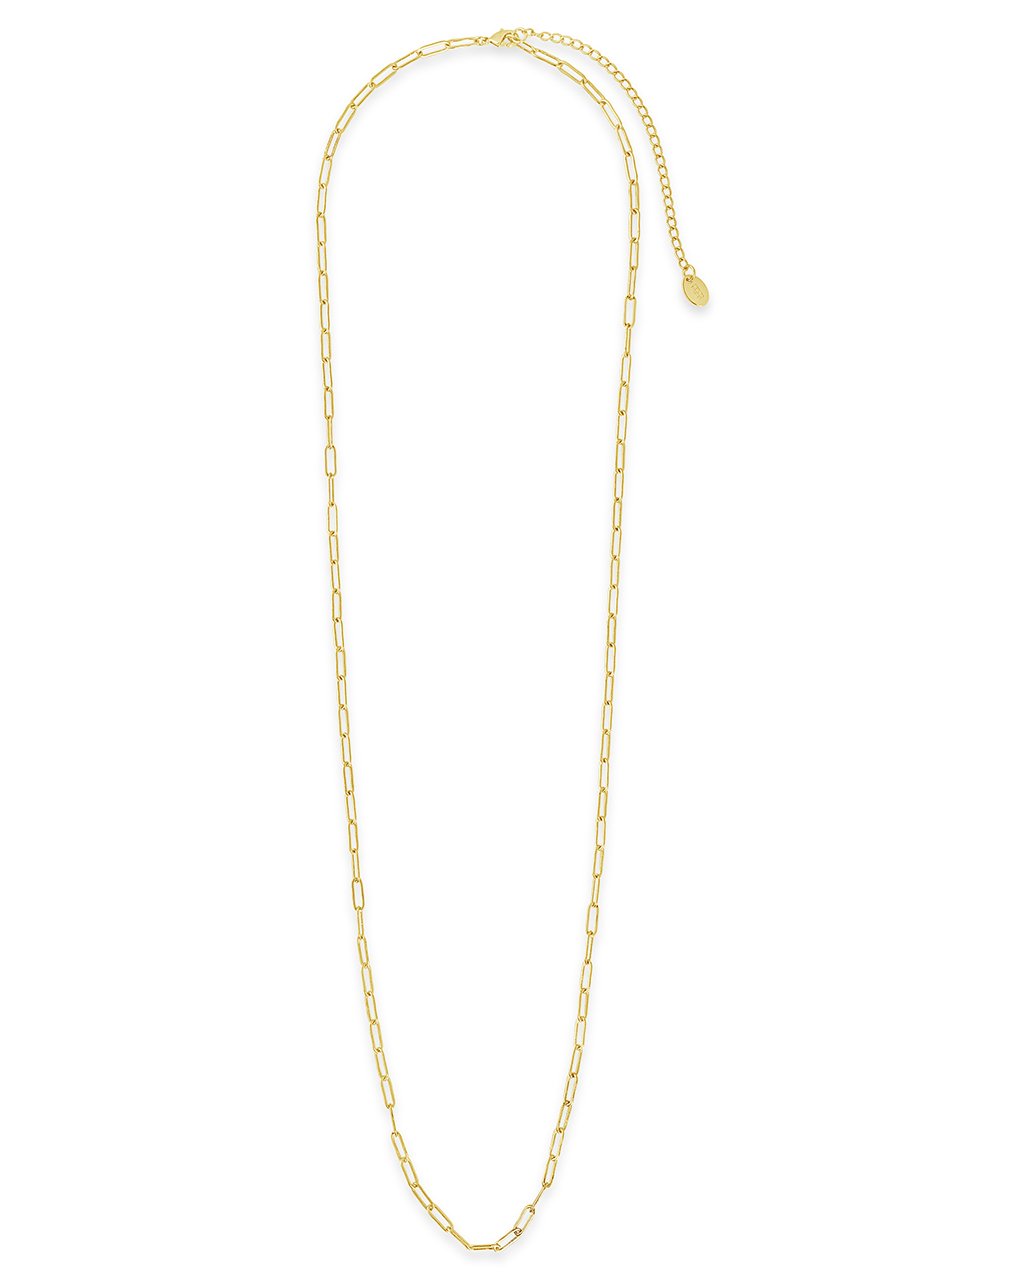 Polished Elongated Cable Chain - Sterling Forever